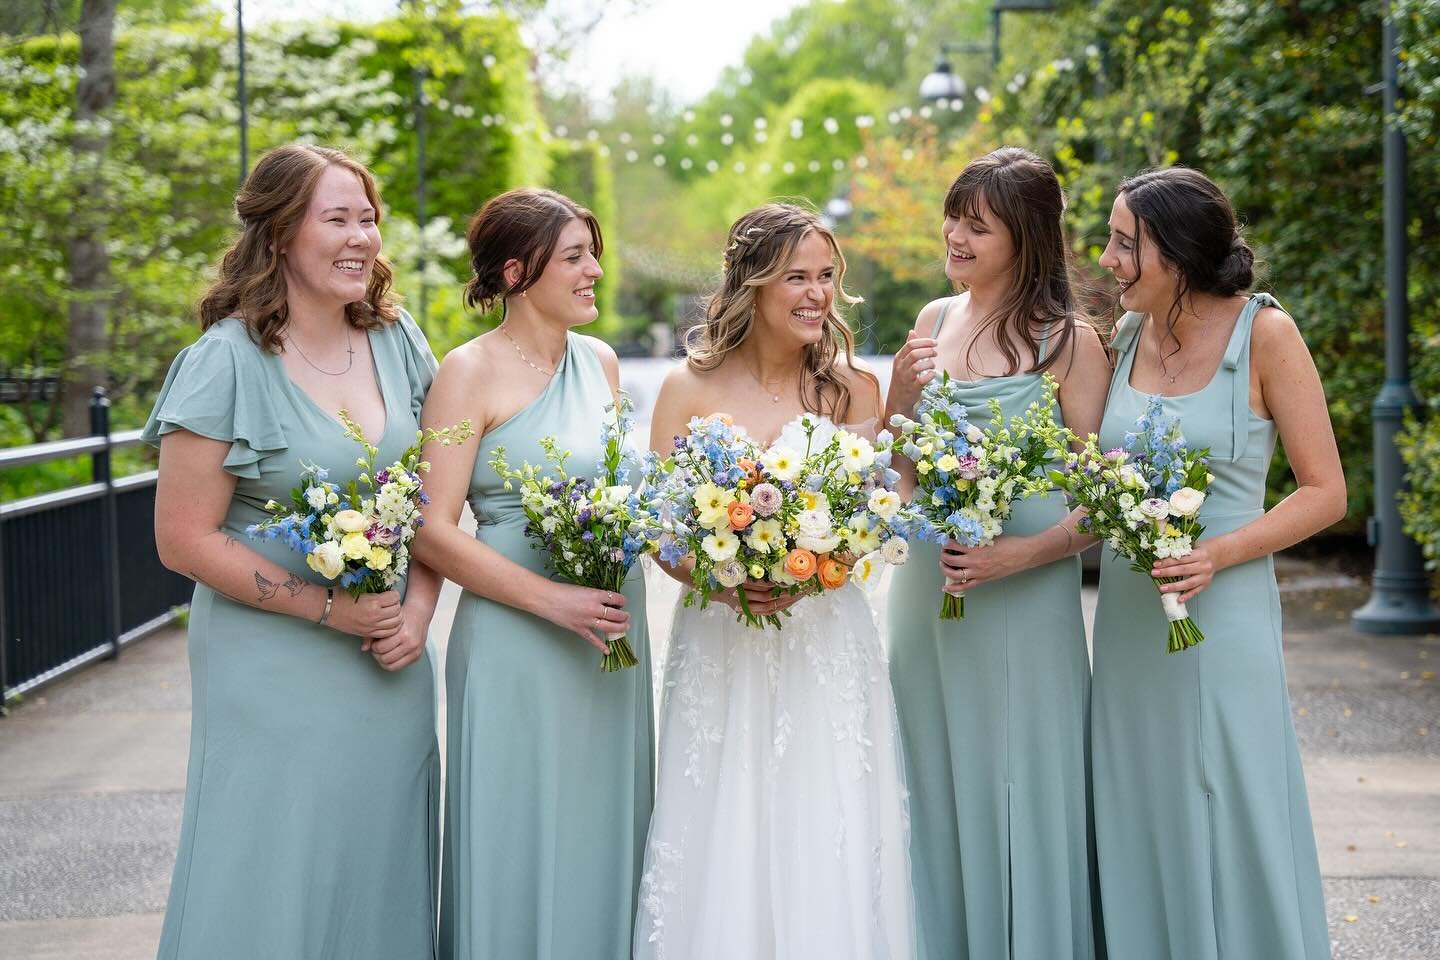 This bridal party &gt;&gt;&gt; 

My biggest piece of advice for when your choosing who you want to be in your bridal party, whether you want a large or small one- choose people who have been in your corner. Doesn&rsquo;t matter if you&rsquo;ve known 